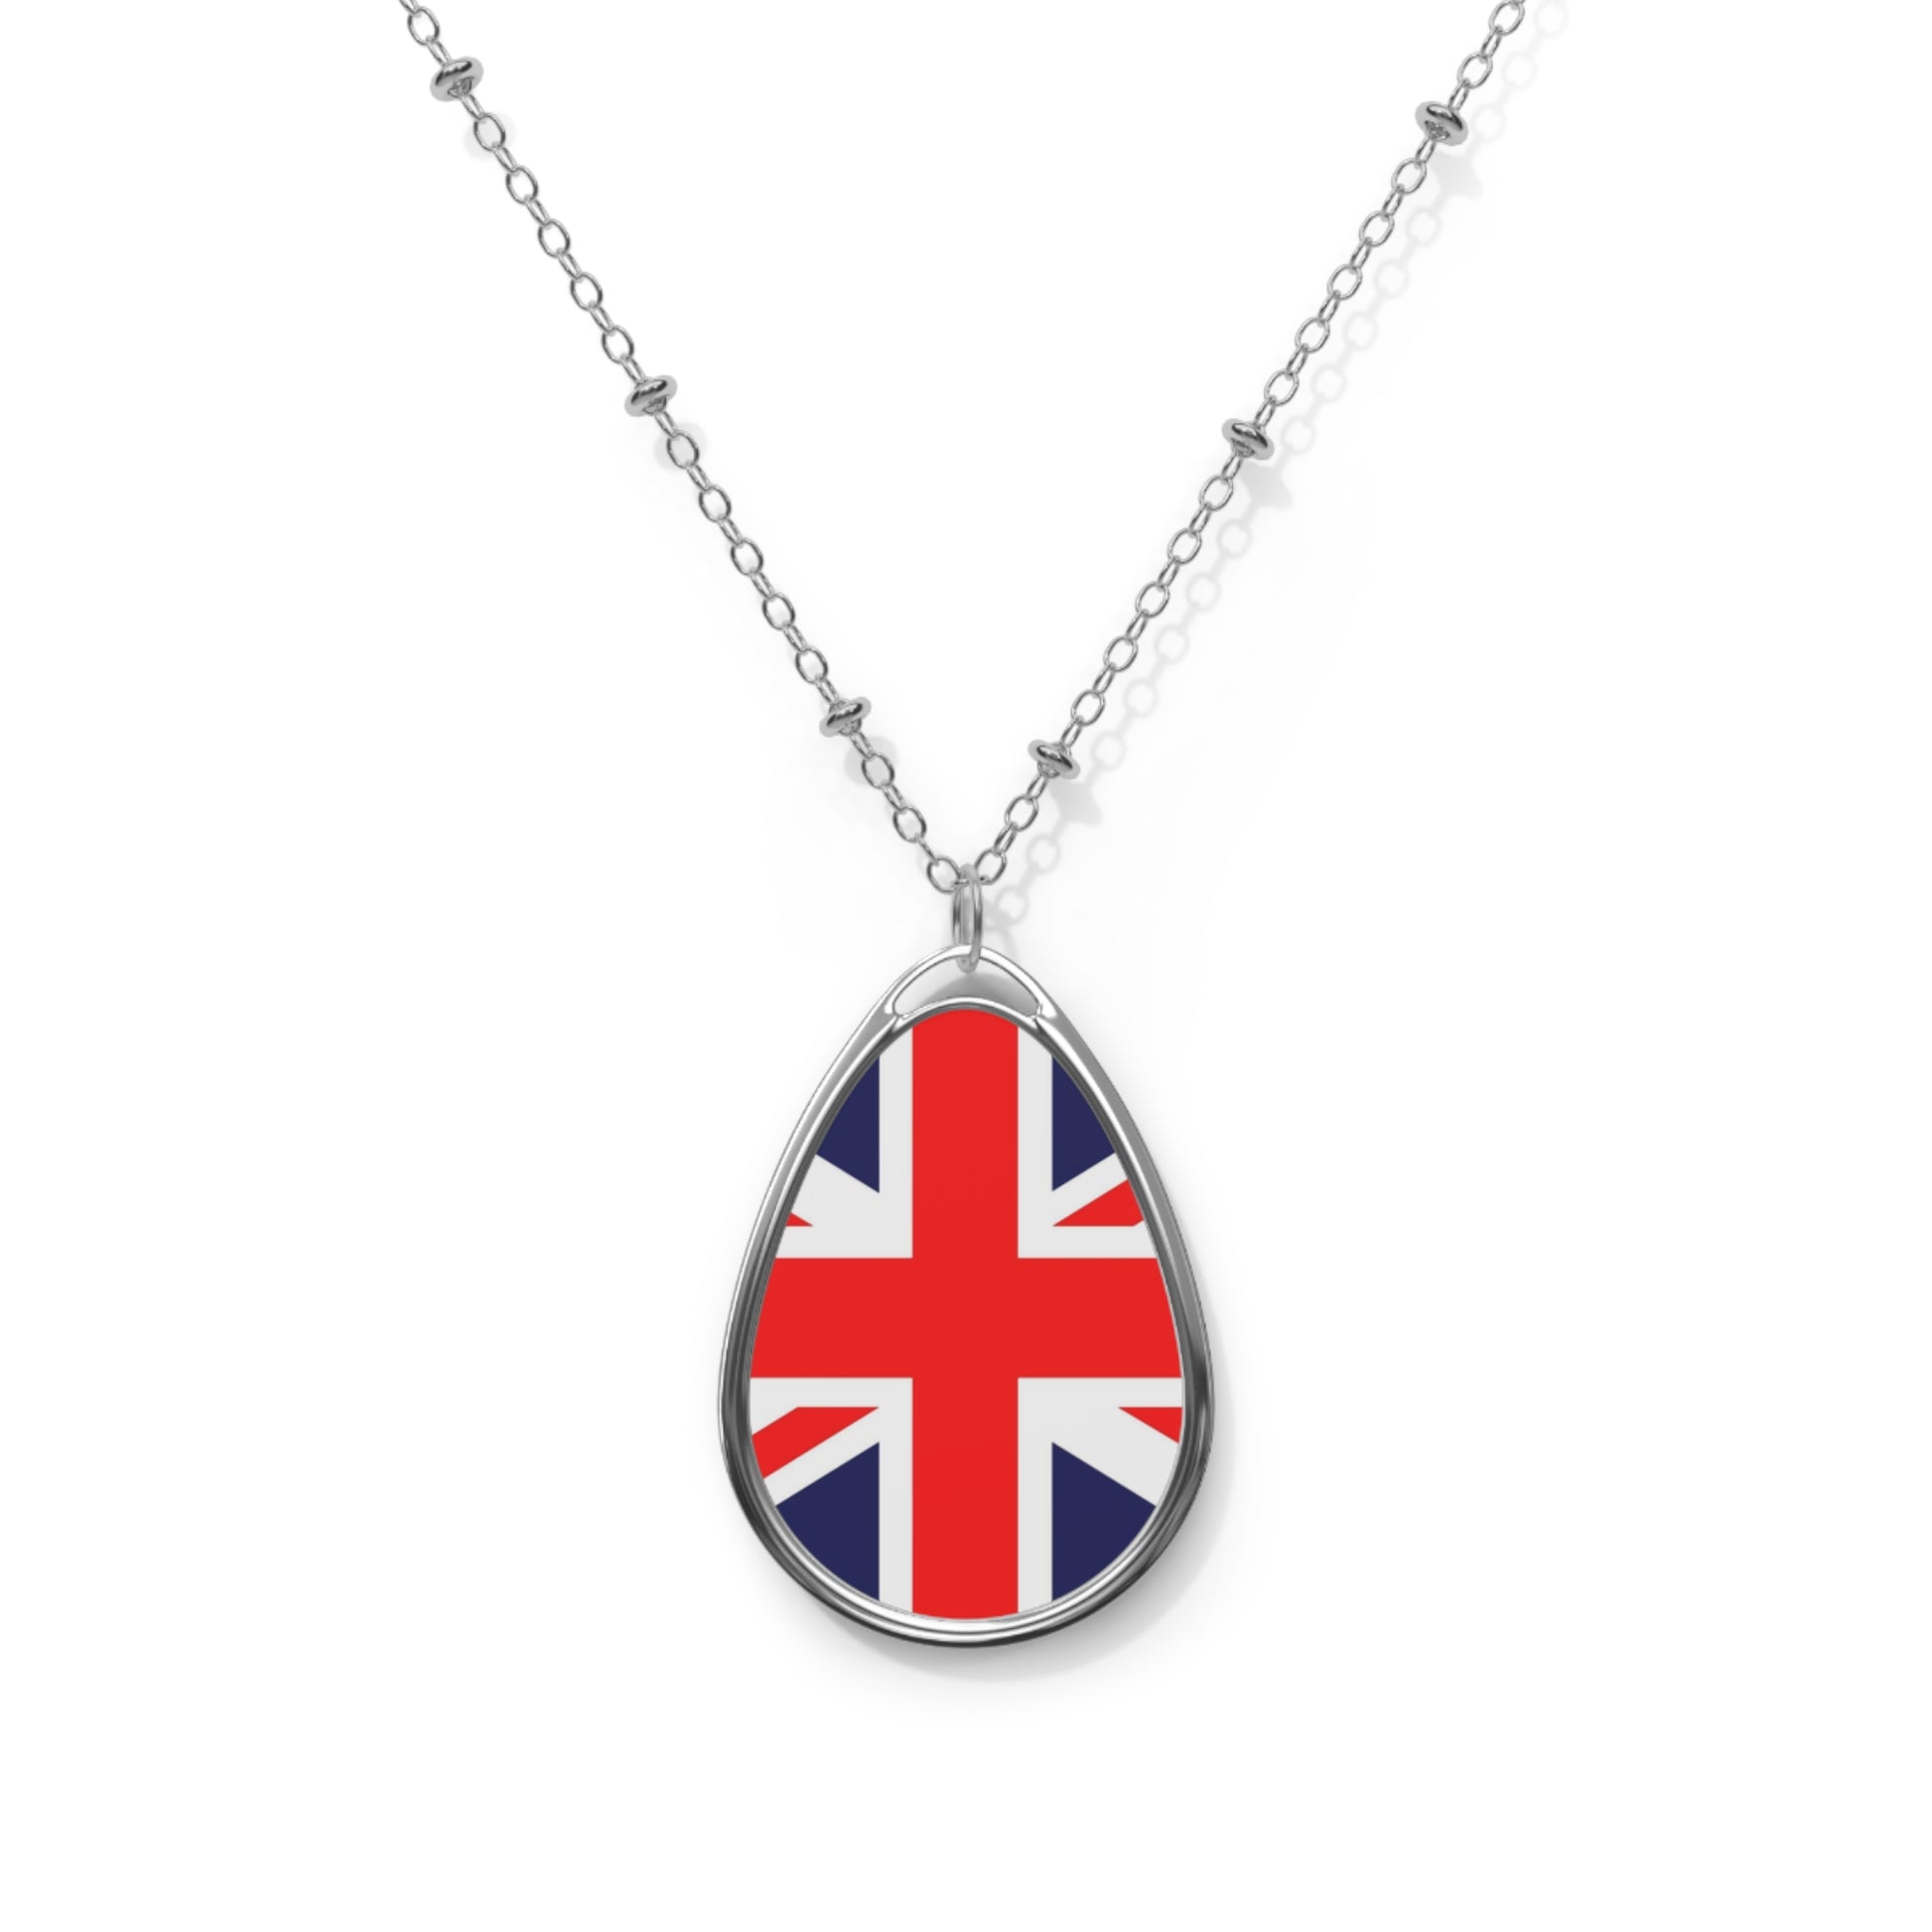 Union Jack Flag Necklace / Patriotic Jewelry For England Lover